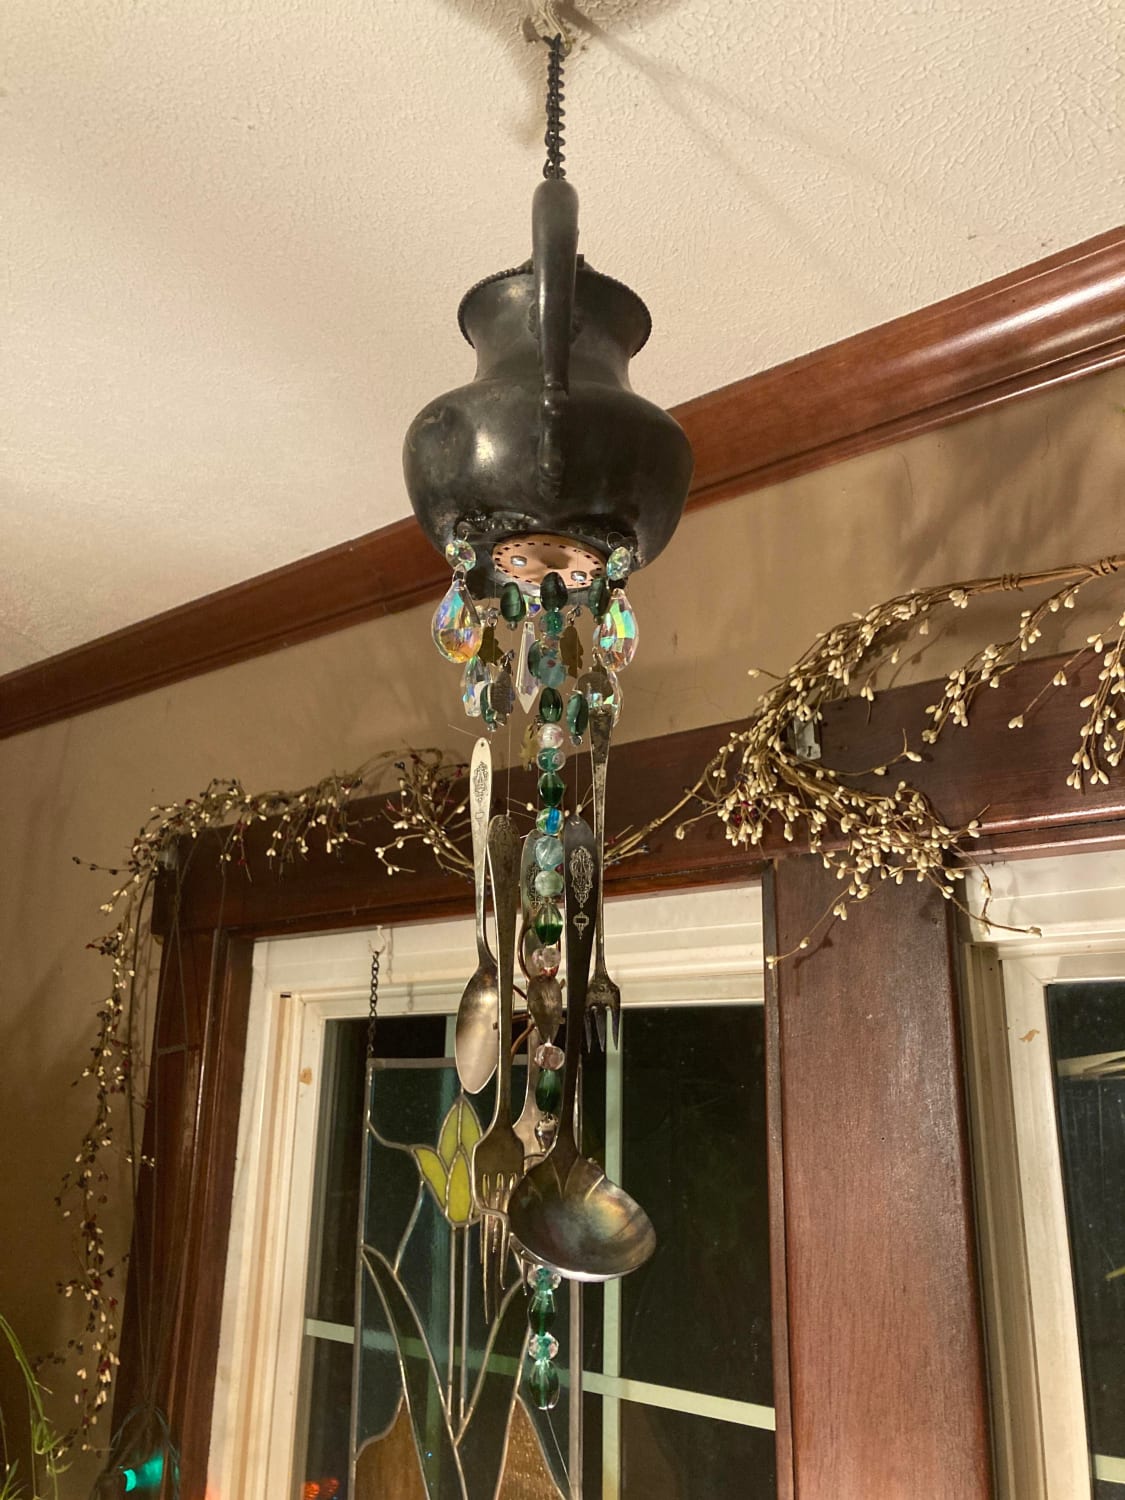 My Mother in laws latest creation. Indoor wind chime made of old silverware.